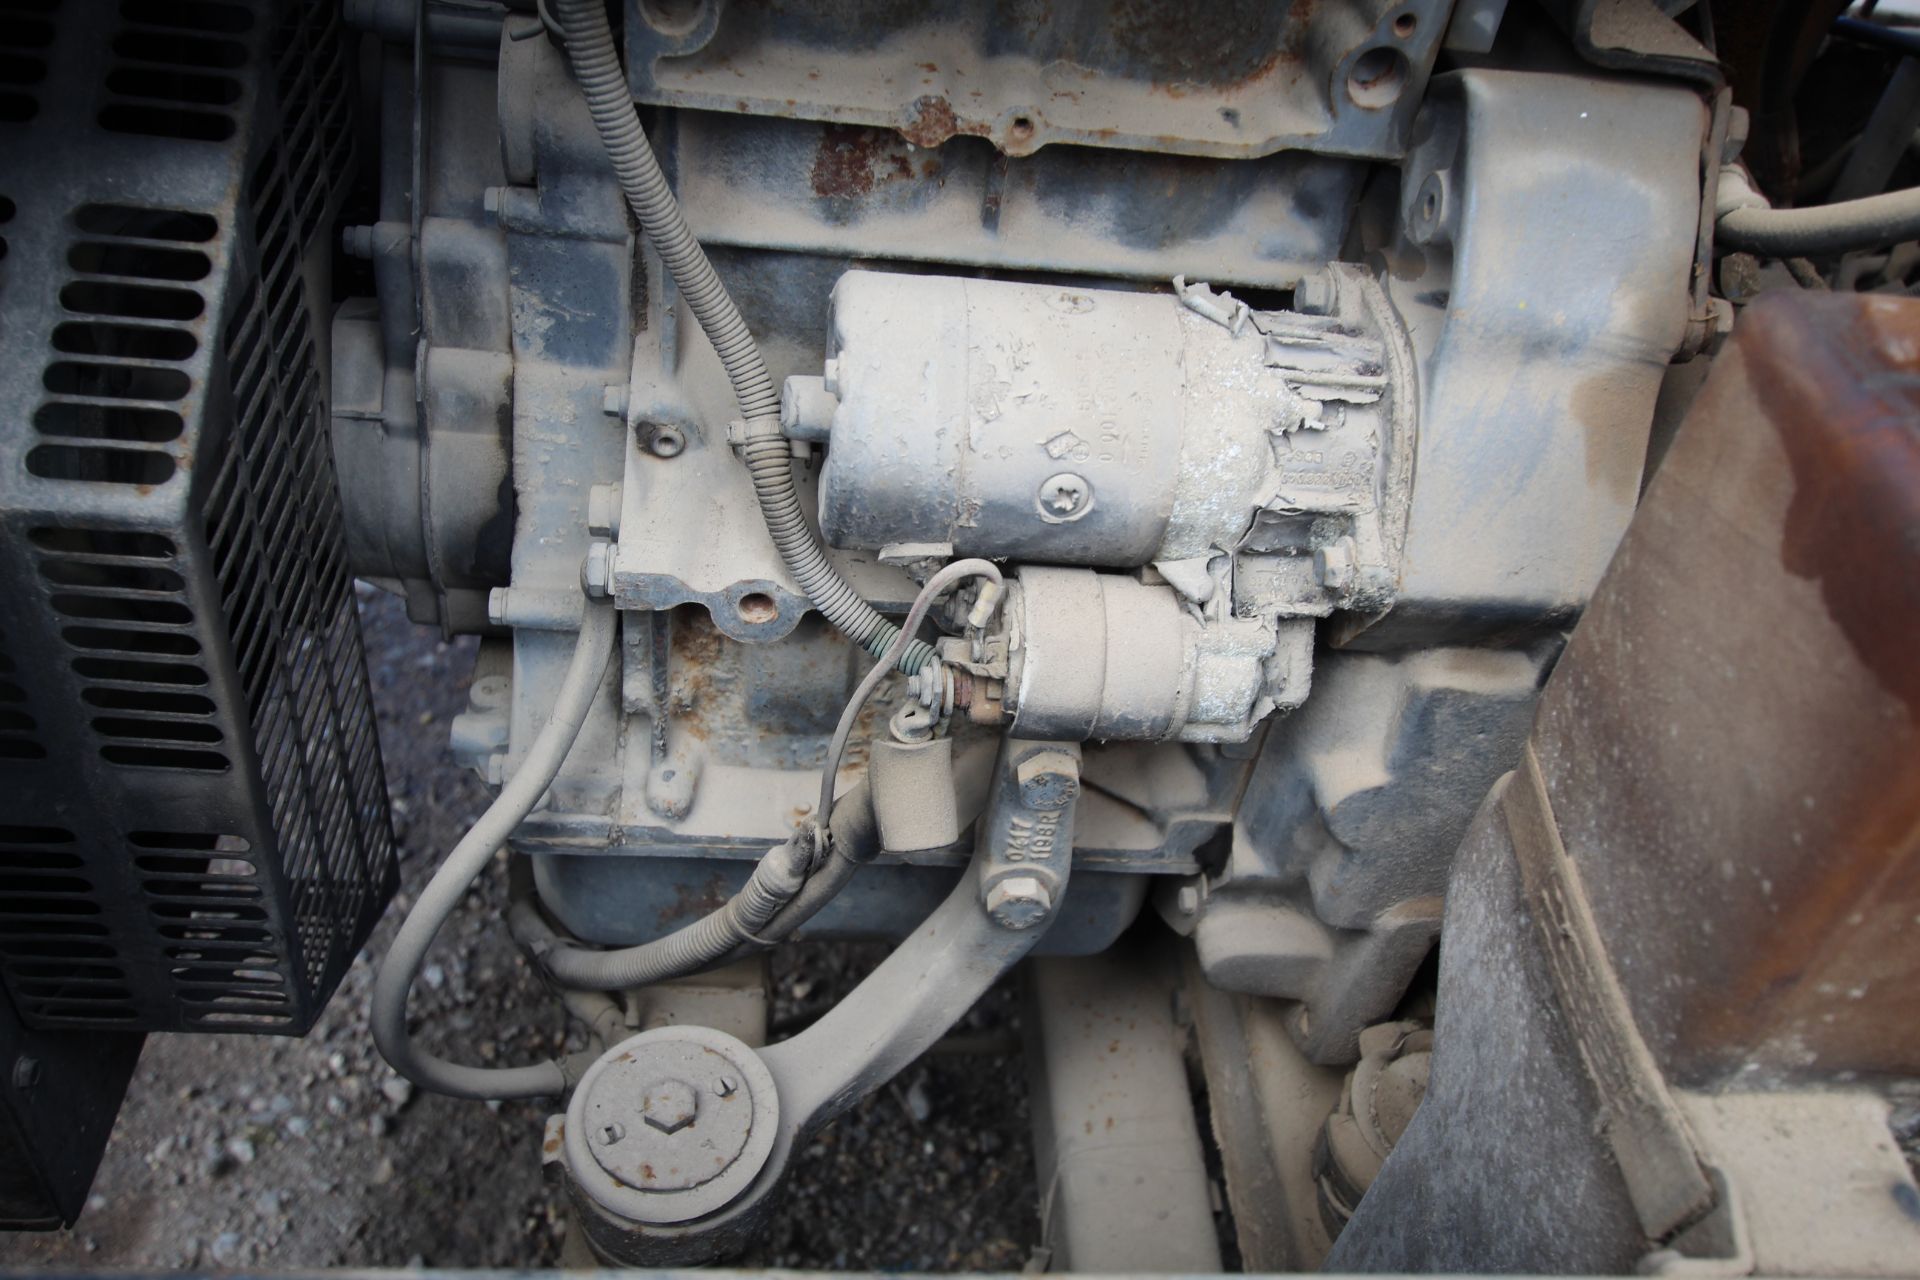 Road tow compressor. With pipes, lance and breaker - Image 27 of 28